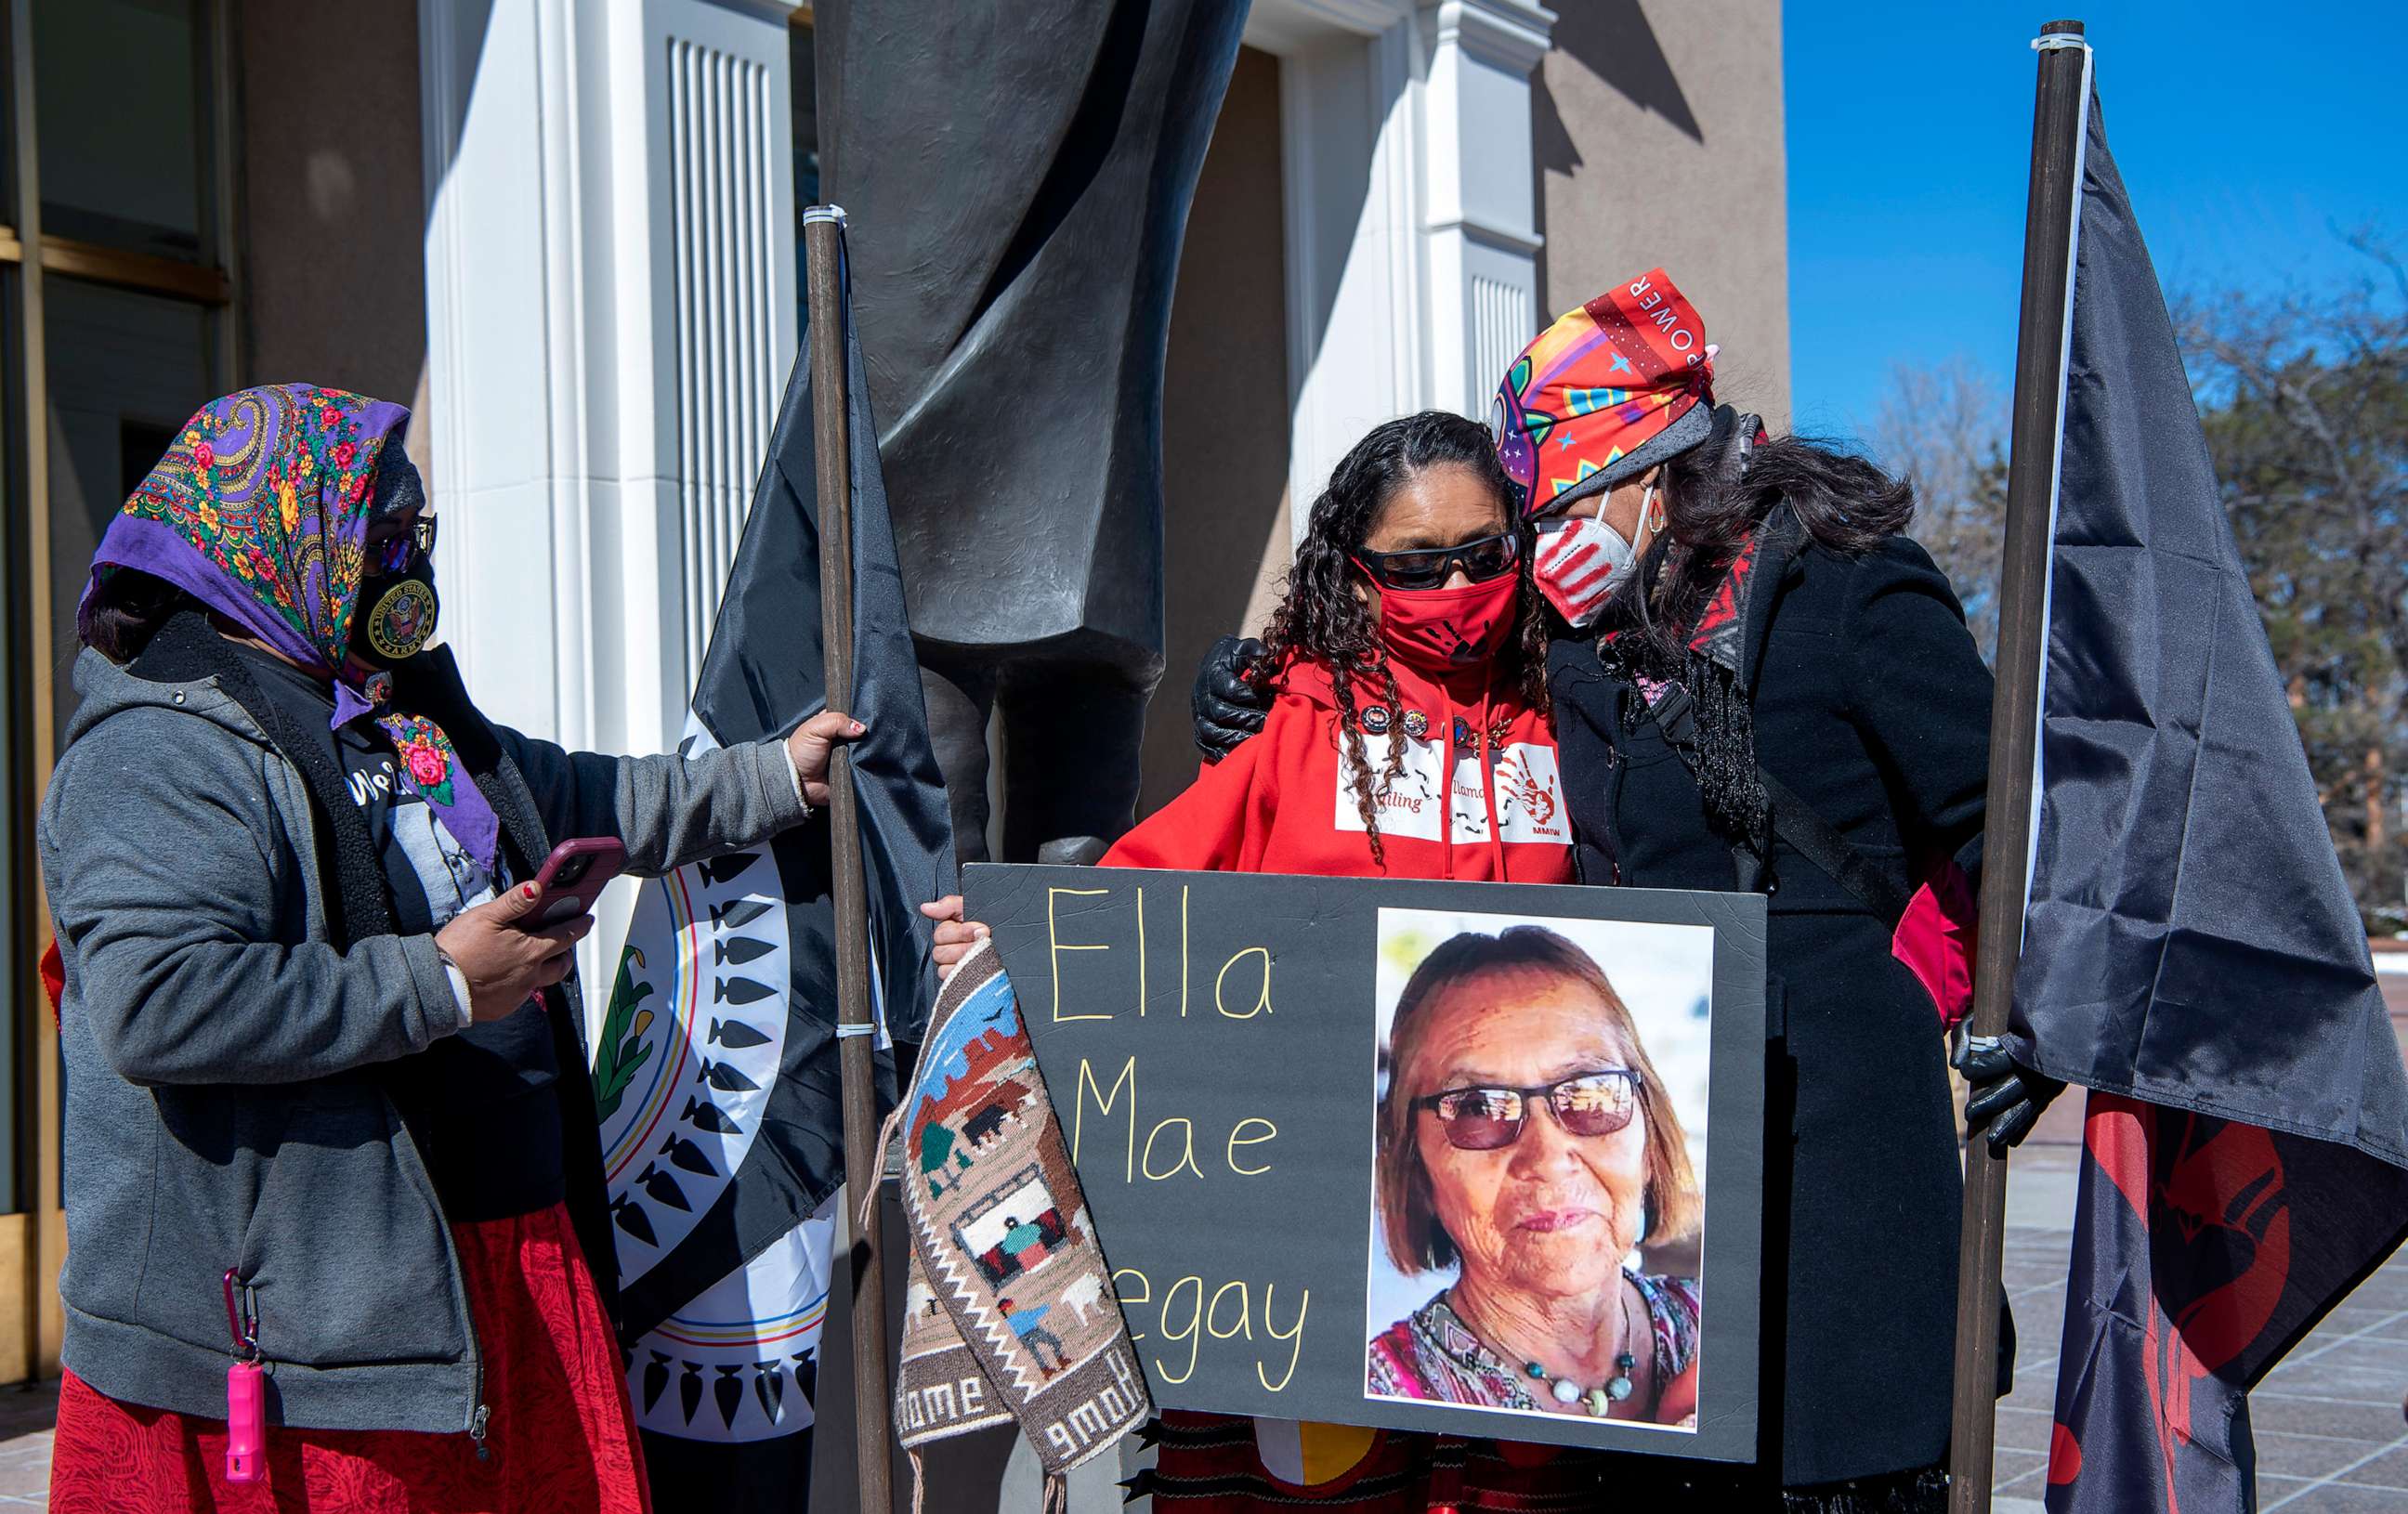 PHOTO: In this Feb. 4, 2022, file photo, Muzzy Denetso, from the Navajo Nation, Seraphine Warren, from Salt Lake City, and Sen. Shannon Pinto take part in a rally for Missing and Murdered Indigenous Women and Relatives, in Santa Fe, N.M.